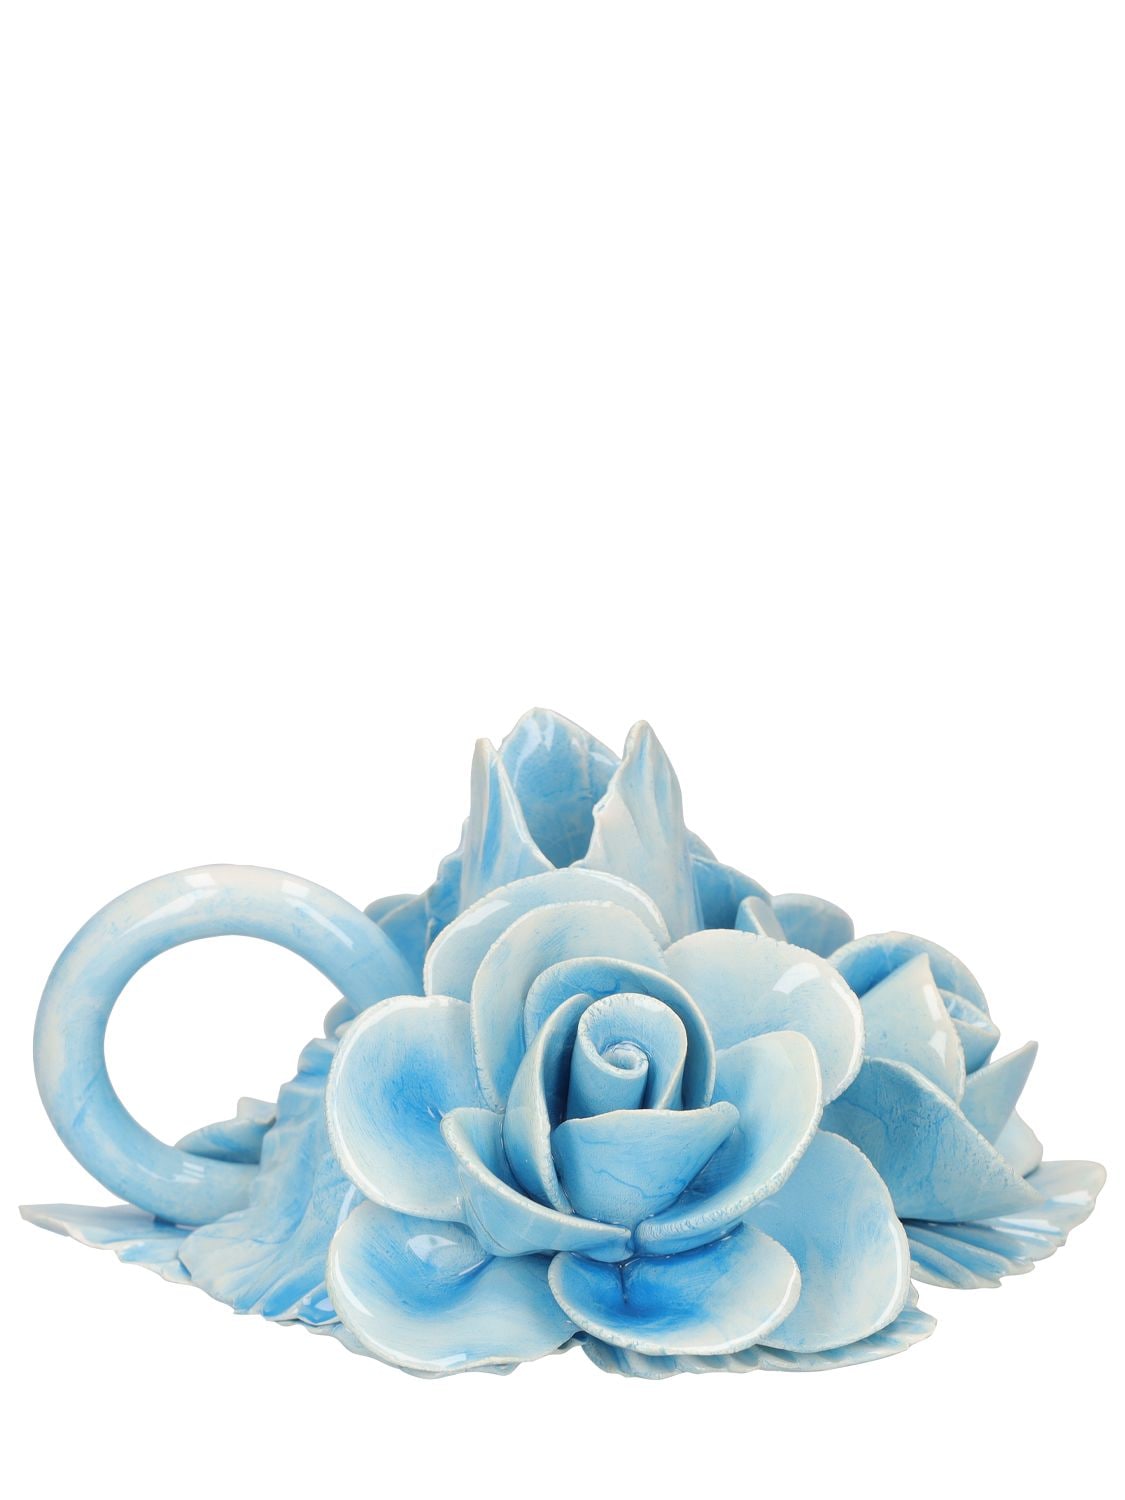 Bitossi Home Rose Candle Holder In Blue